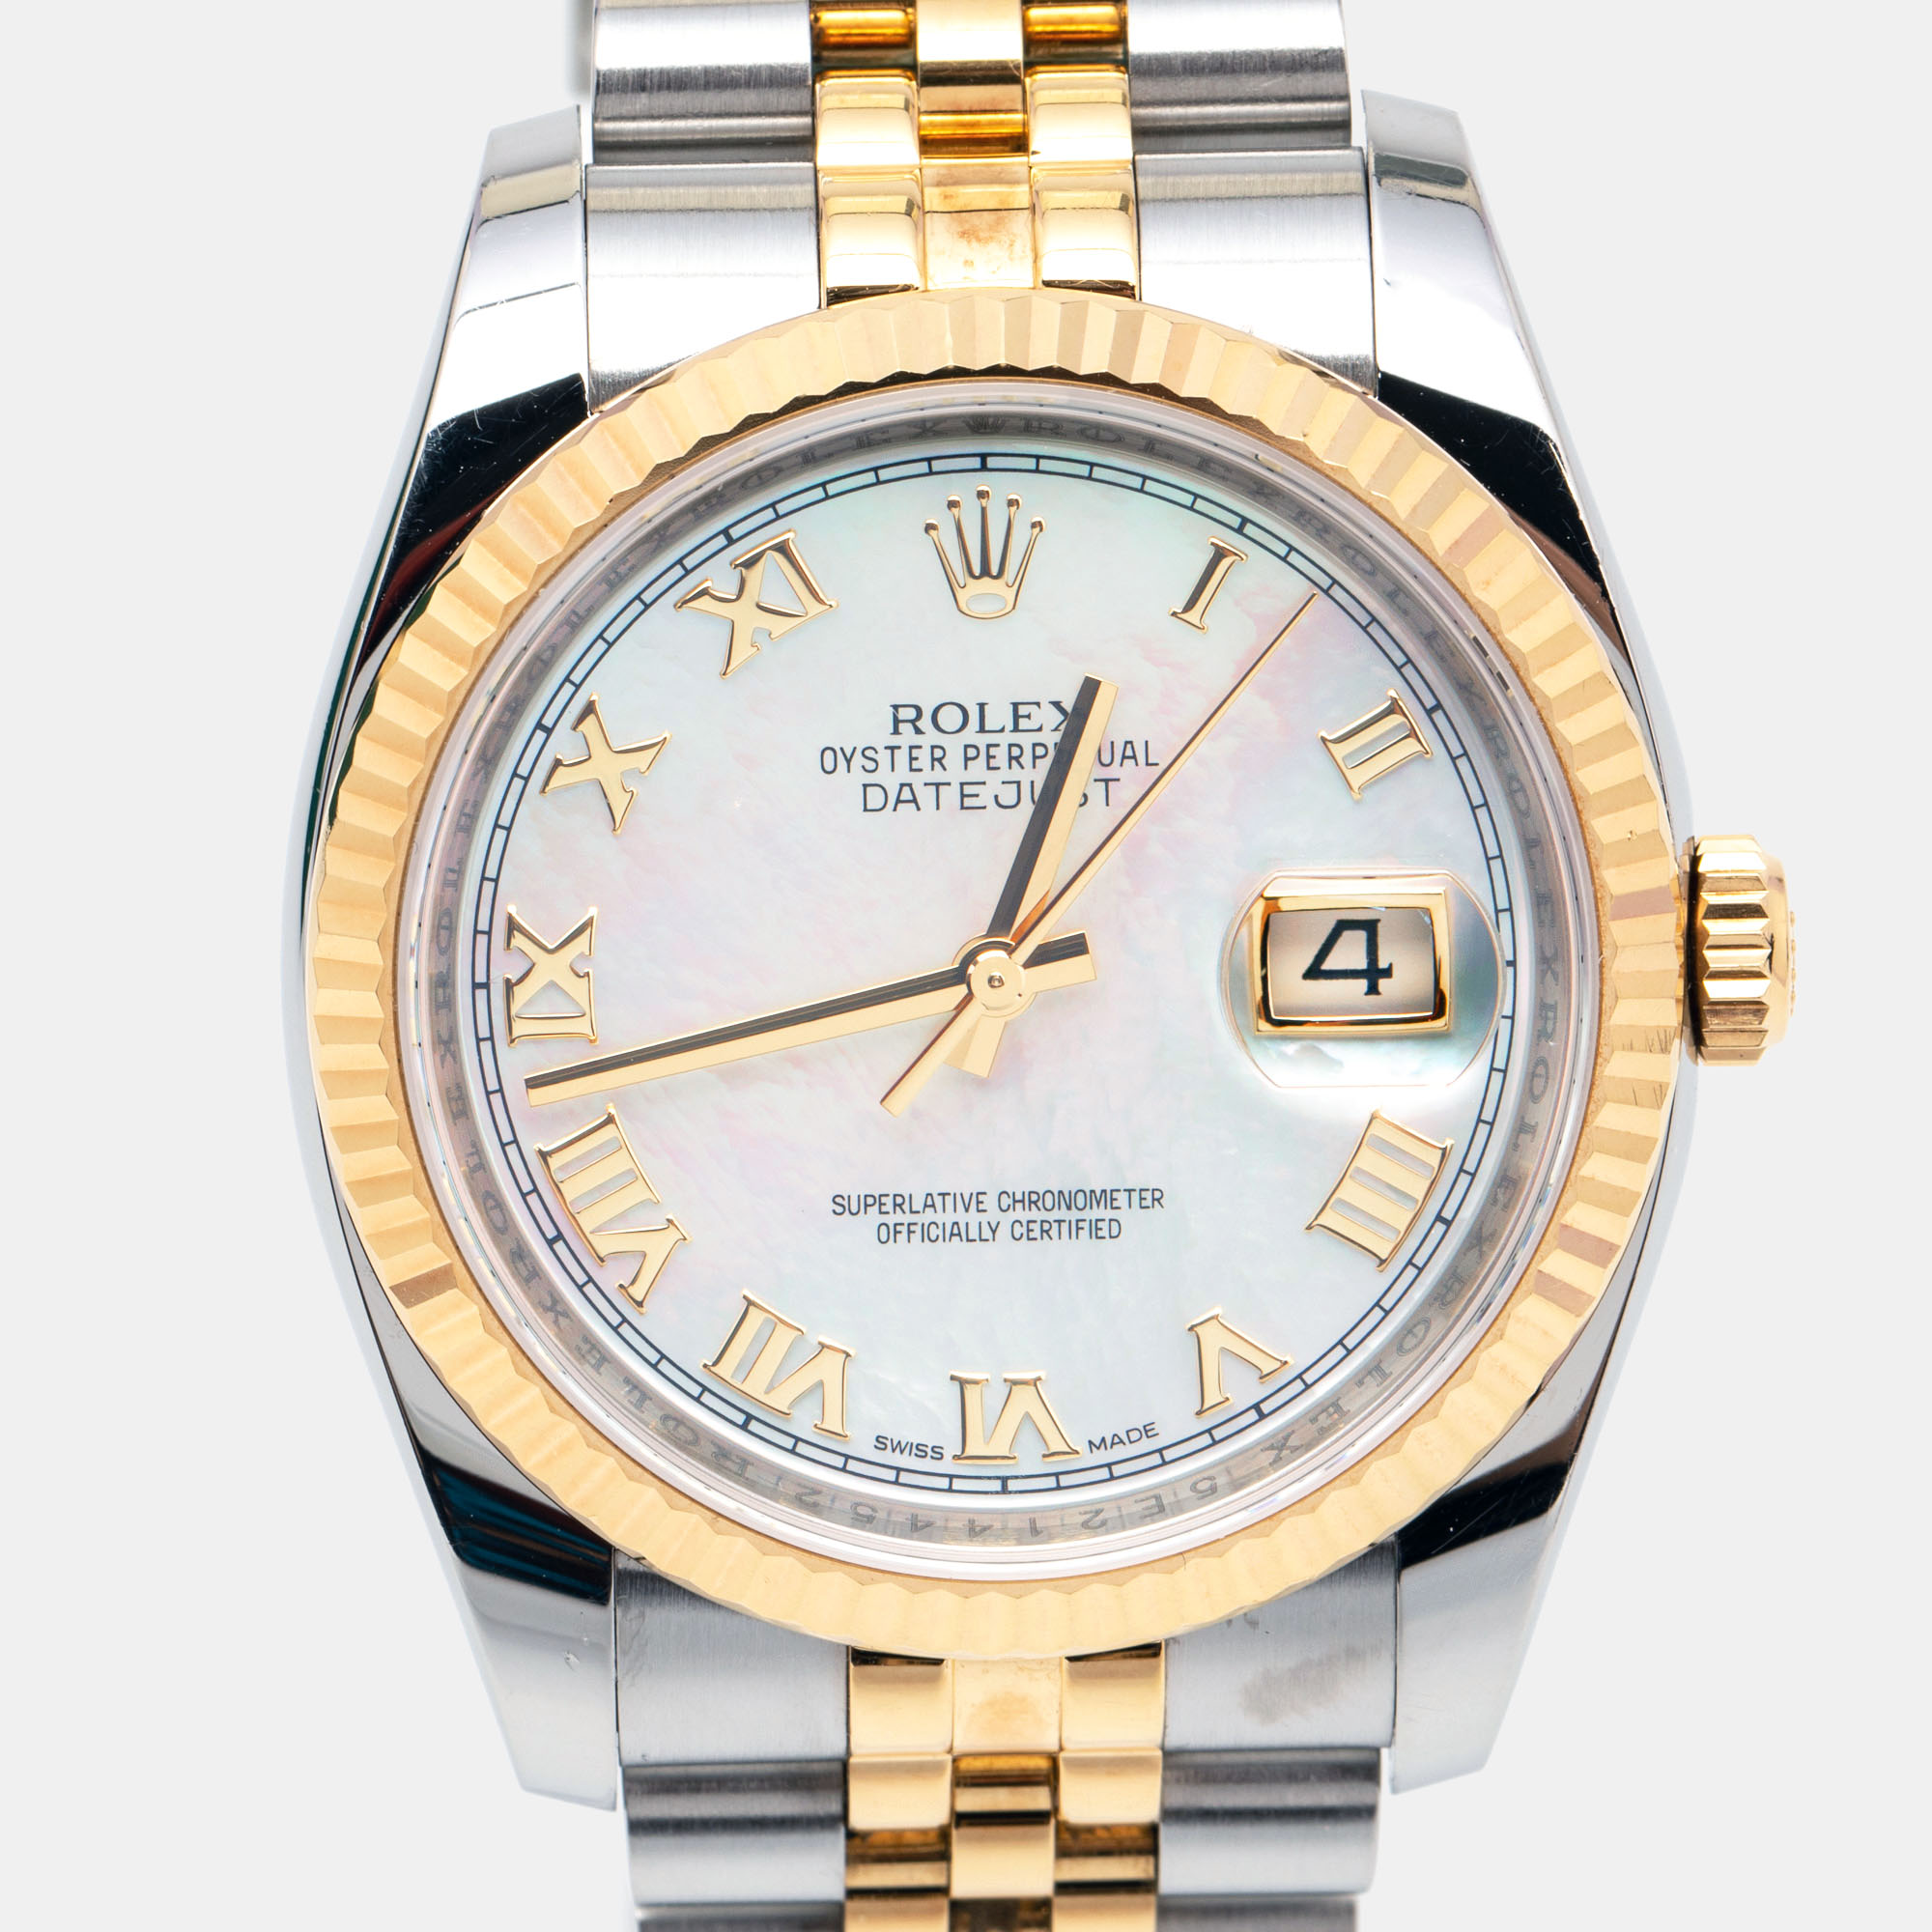 Rolex White Mother Of Pearl 18K Yellow Gold Stainless Steel Datejust 116233 Men's Wristwatch 36 Mm